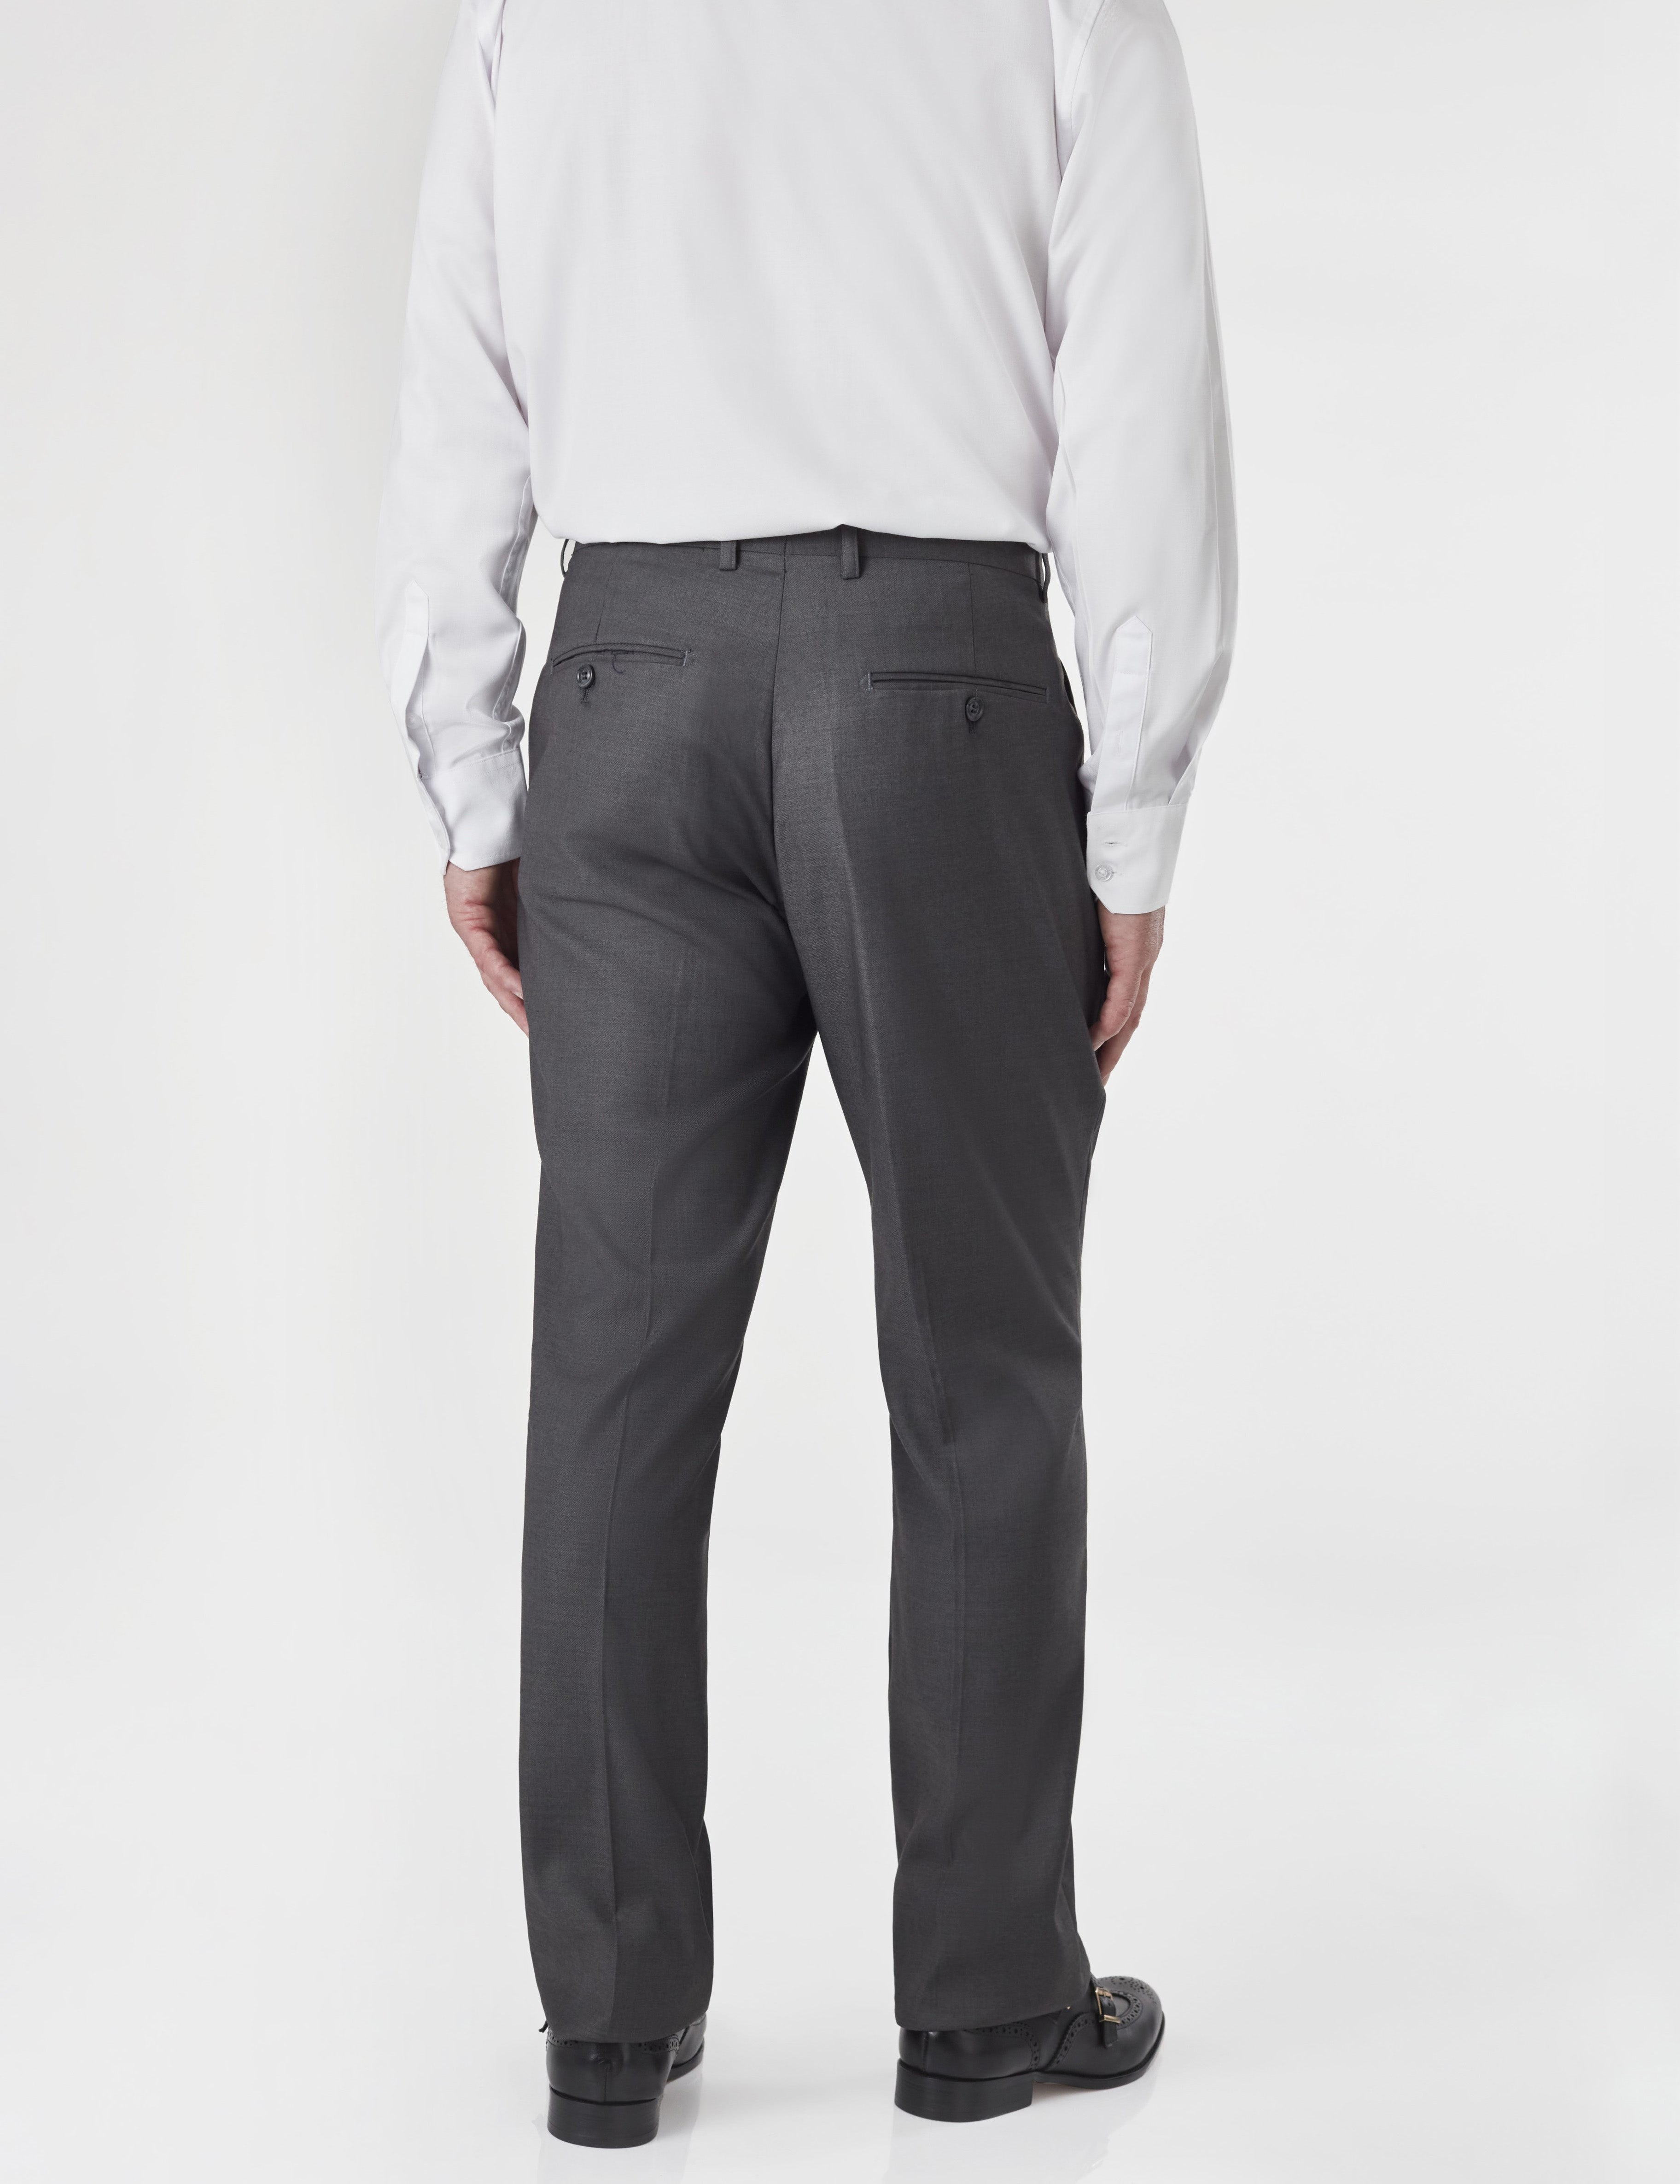 GREY FORMAL TROUSERS